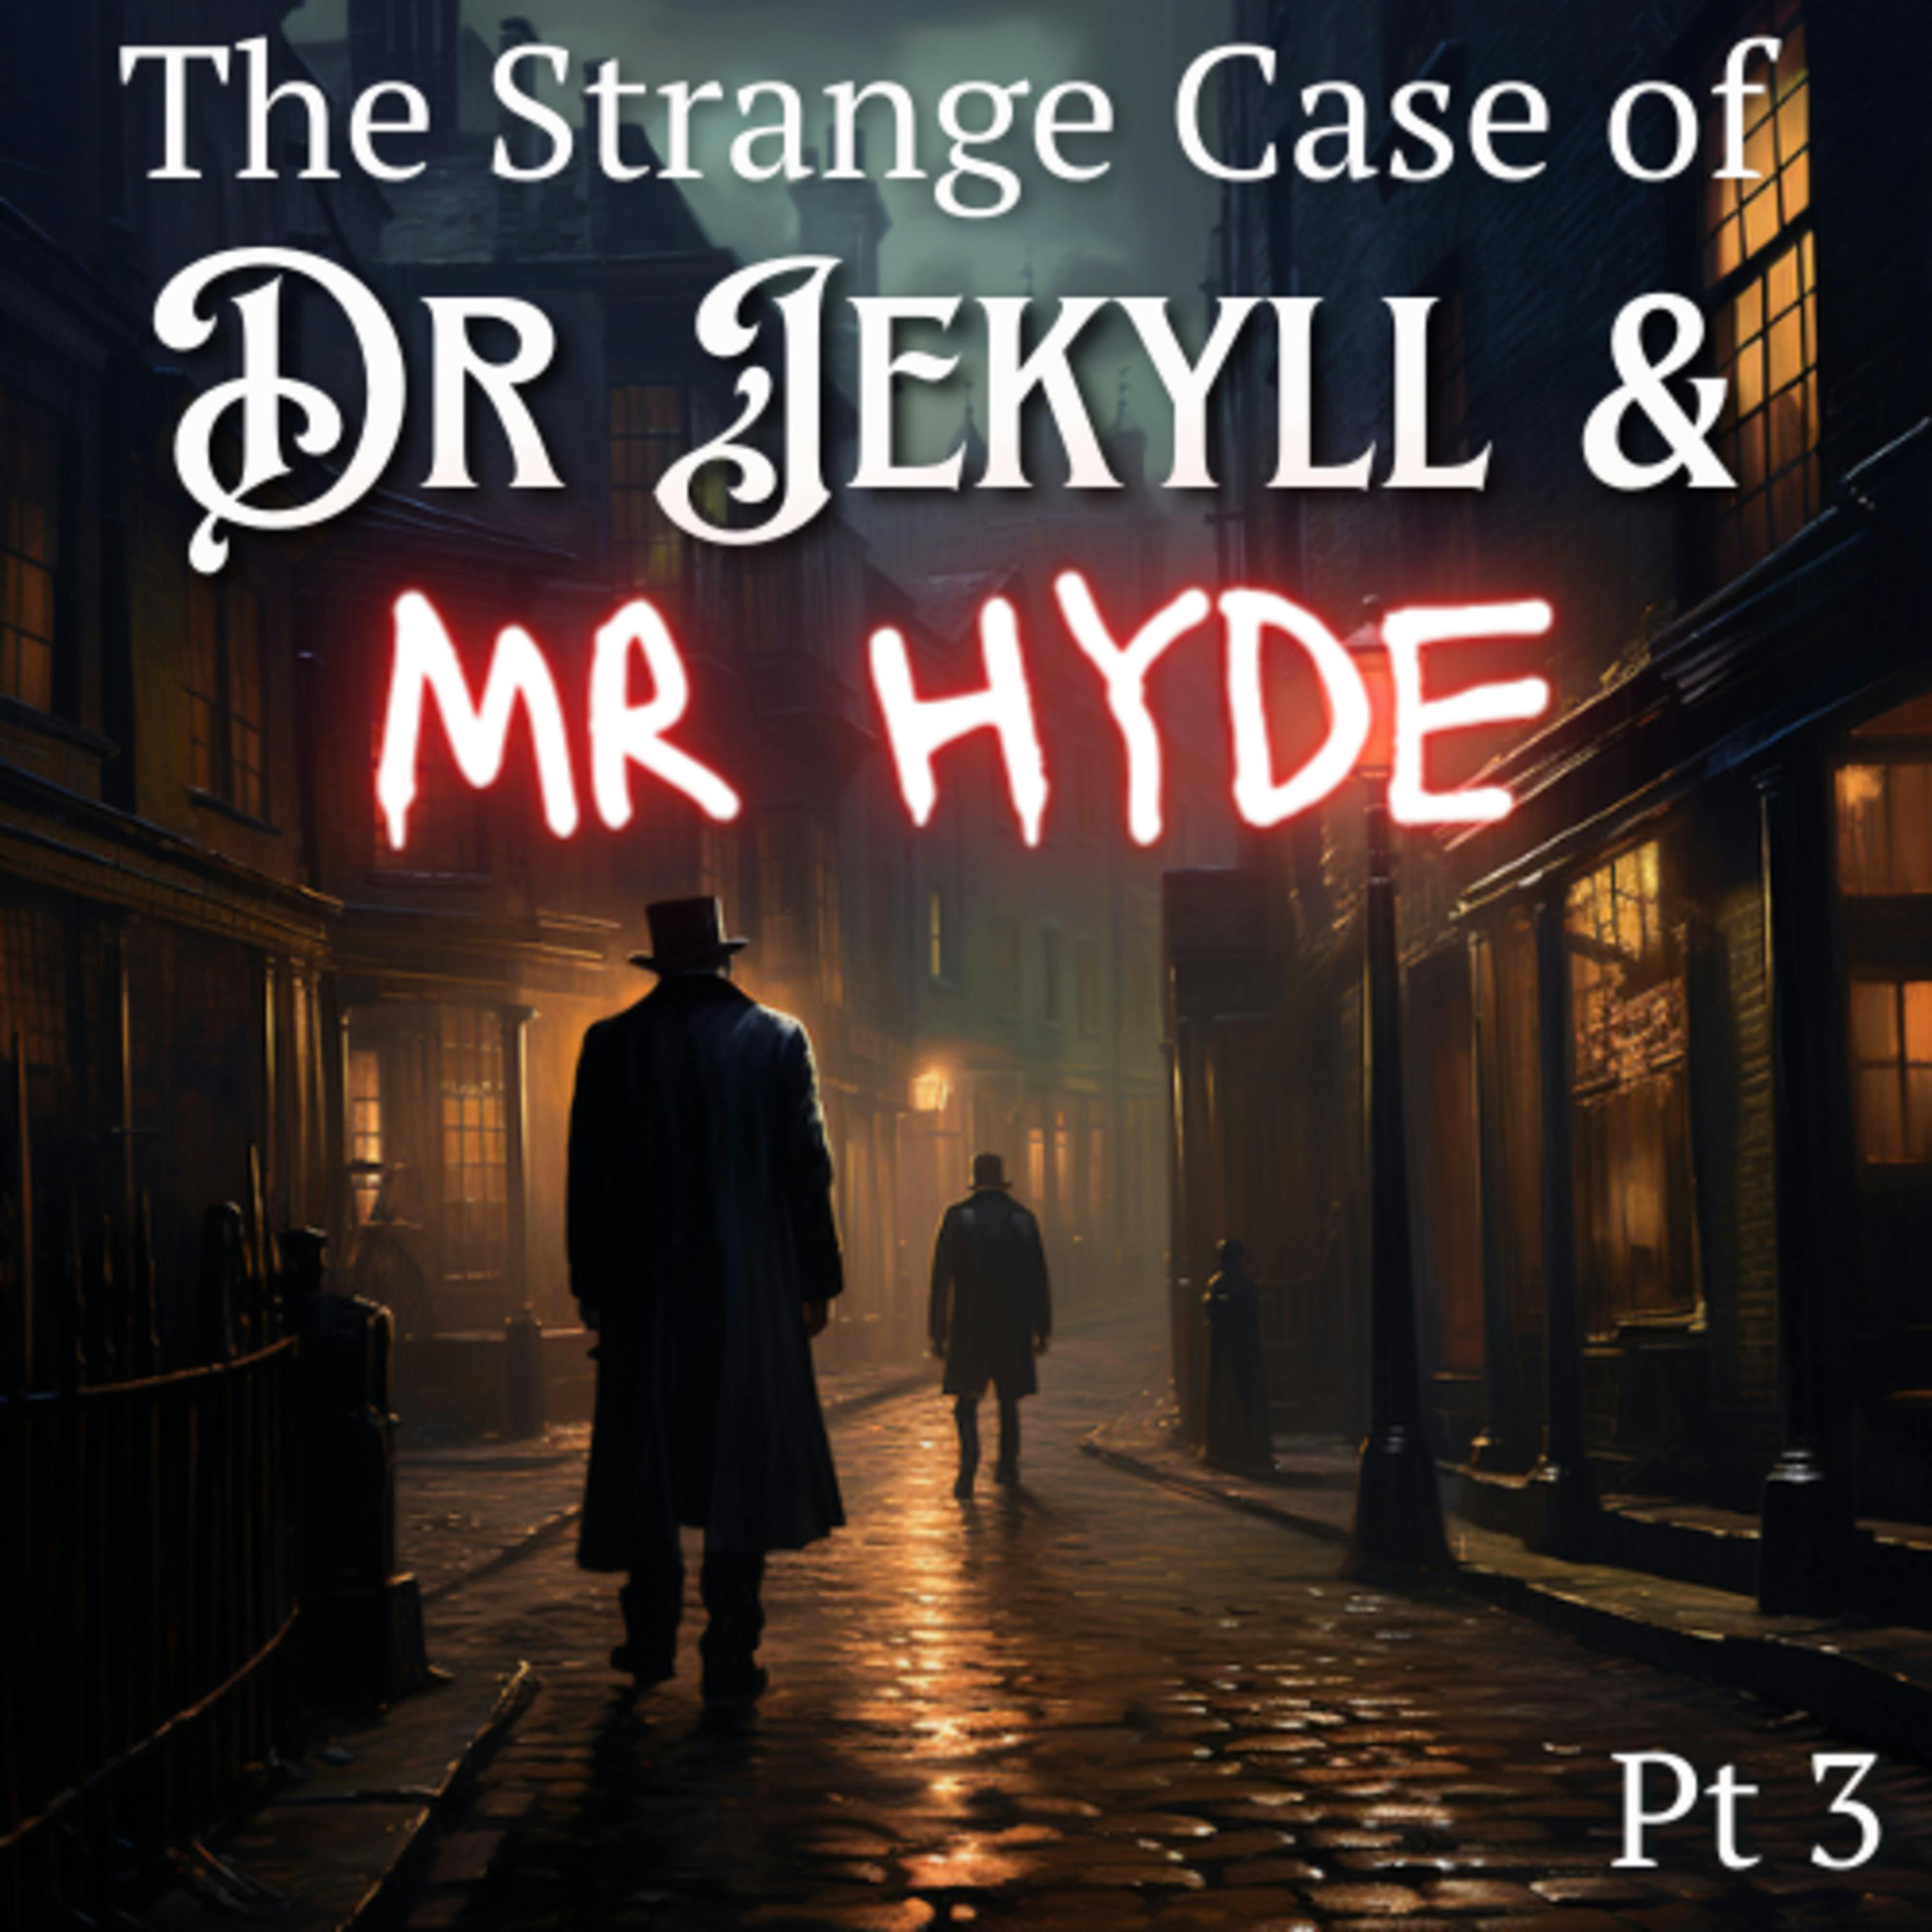 The Strange Case of Dr Jekyll and Mr Hyde Part 3